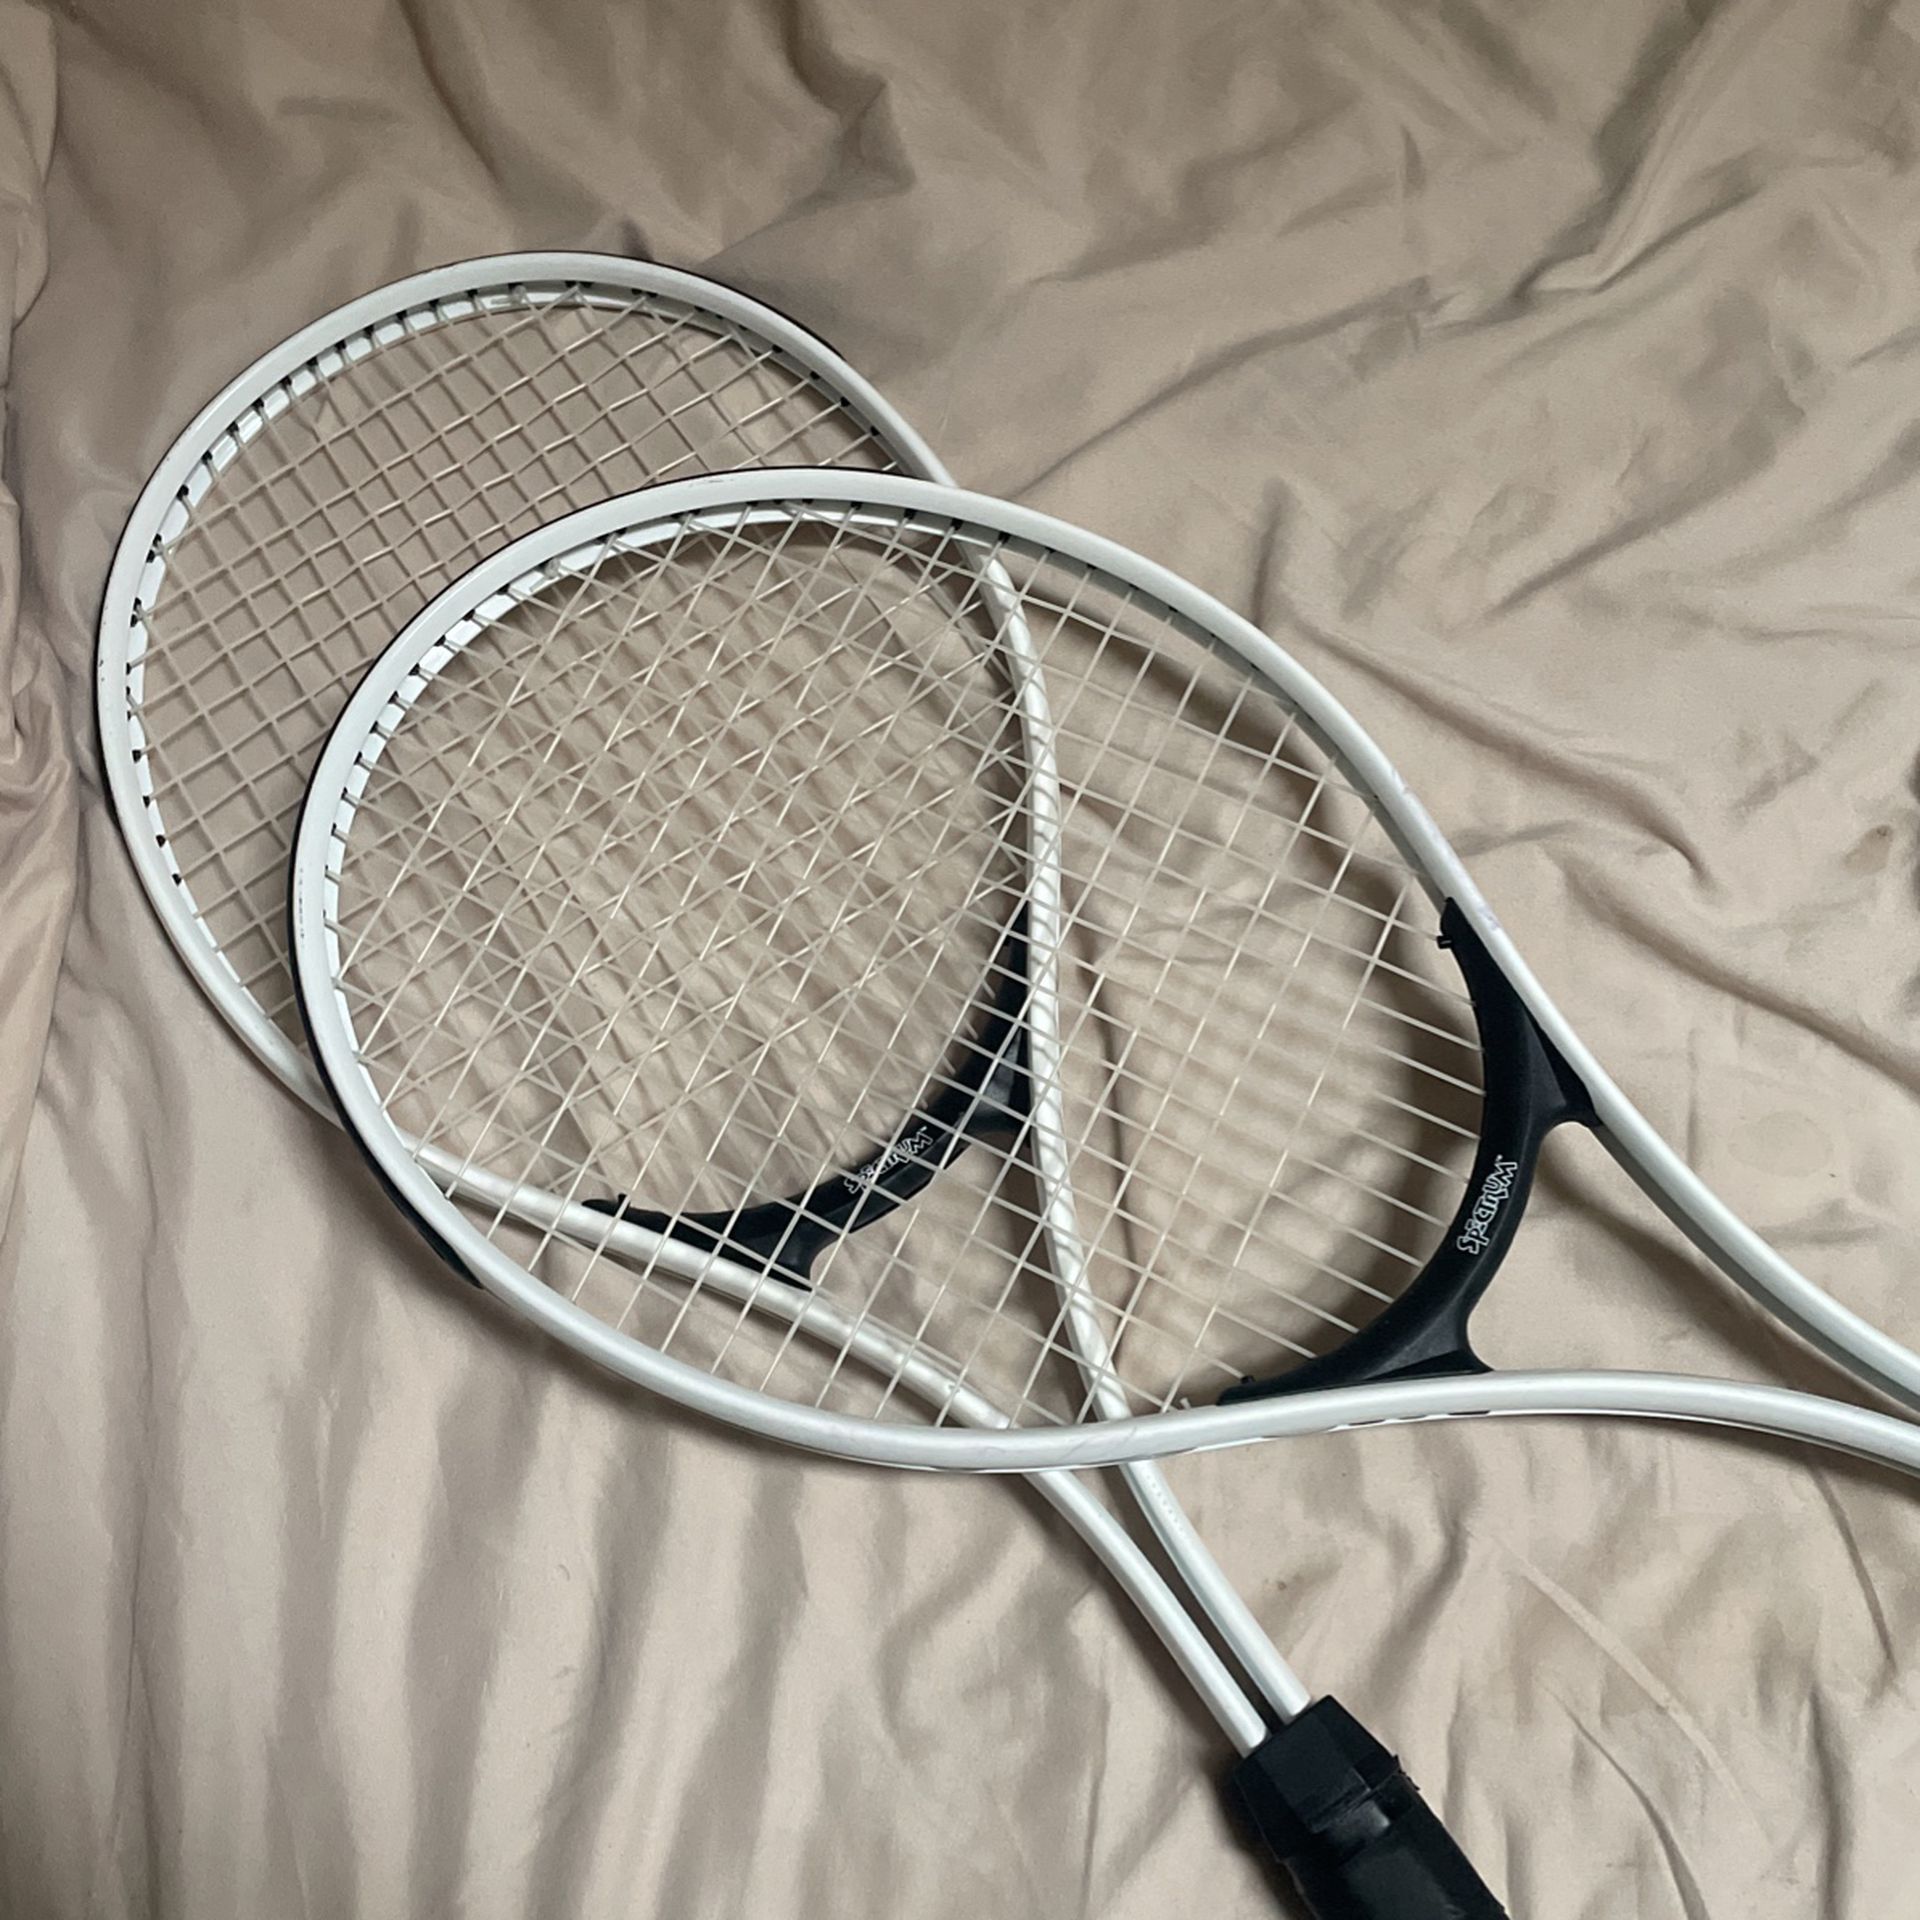 Tennis Rackets Never Used